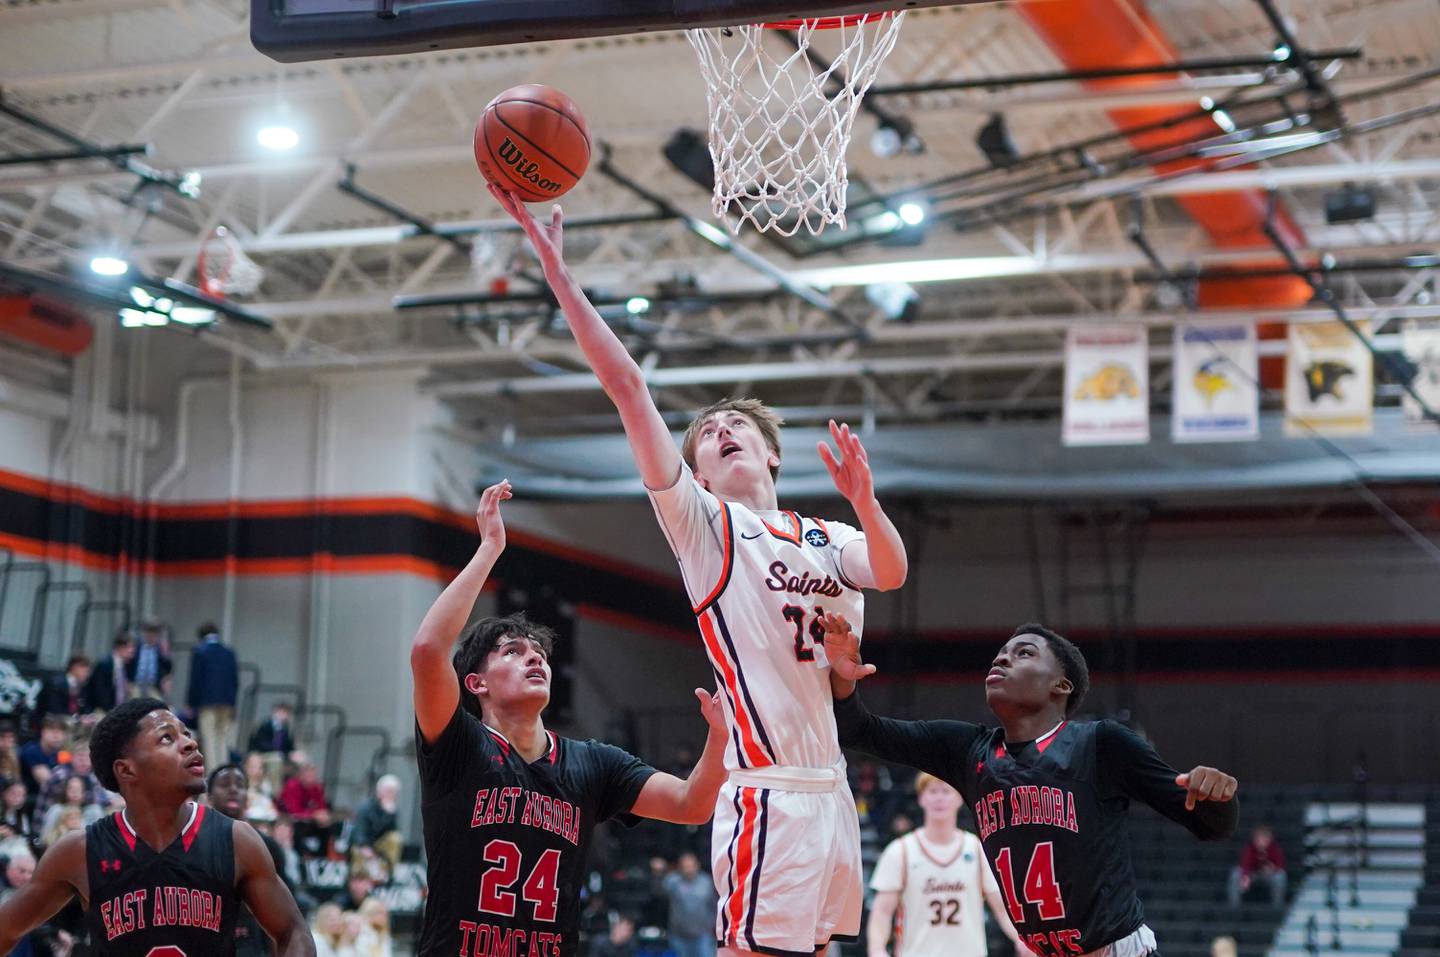 St. Charles East's Andrew Wolfsmith (24) shoots the ball in the post against East Aurora's Luis Umana (24) and Ryan Robinson (14) during the 64th annual Ron Johnson Thanksgiving Basketball Tournament at St. Charles East High School on Monday, Nov 20, 2023.